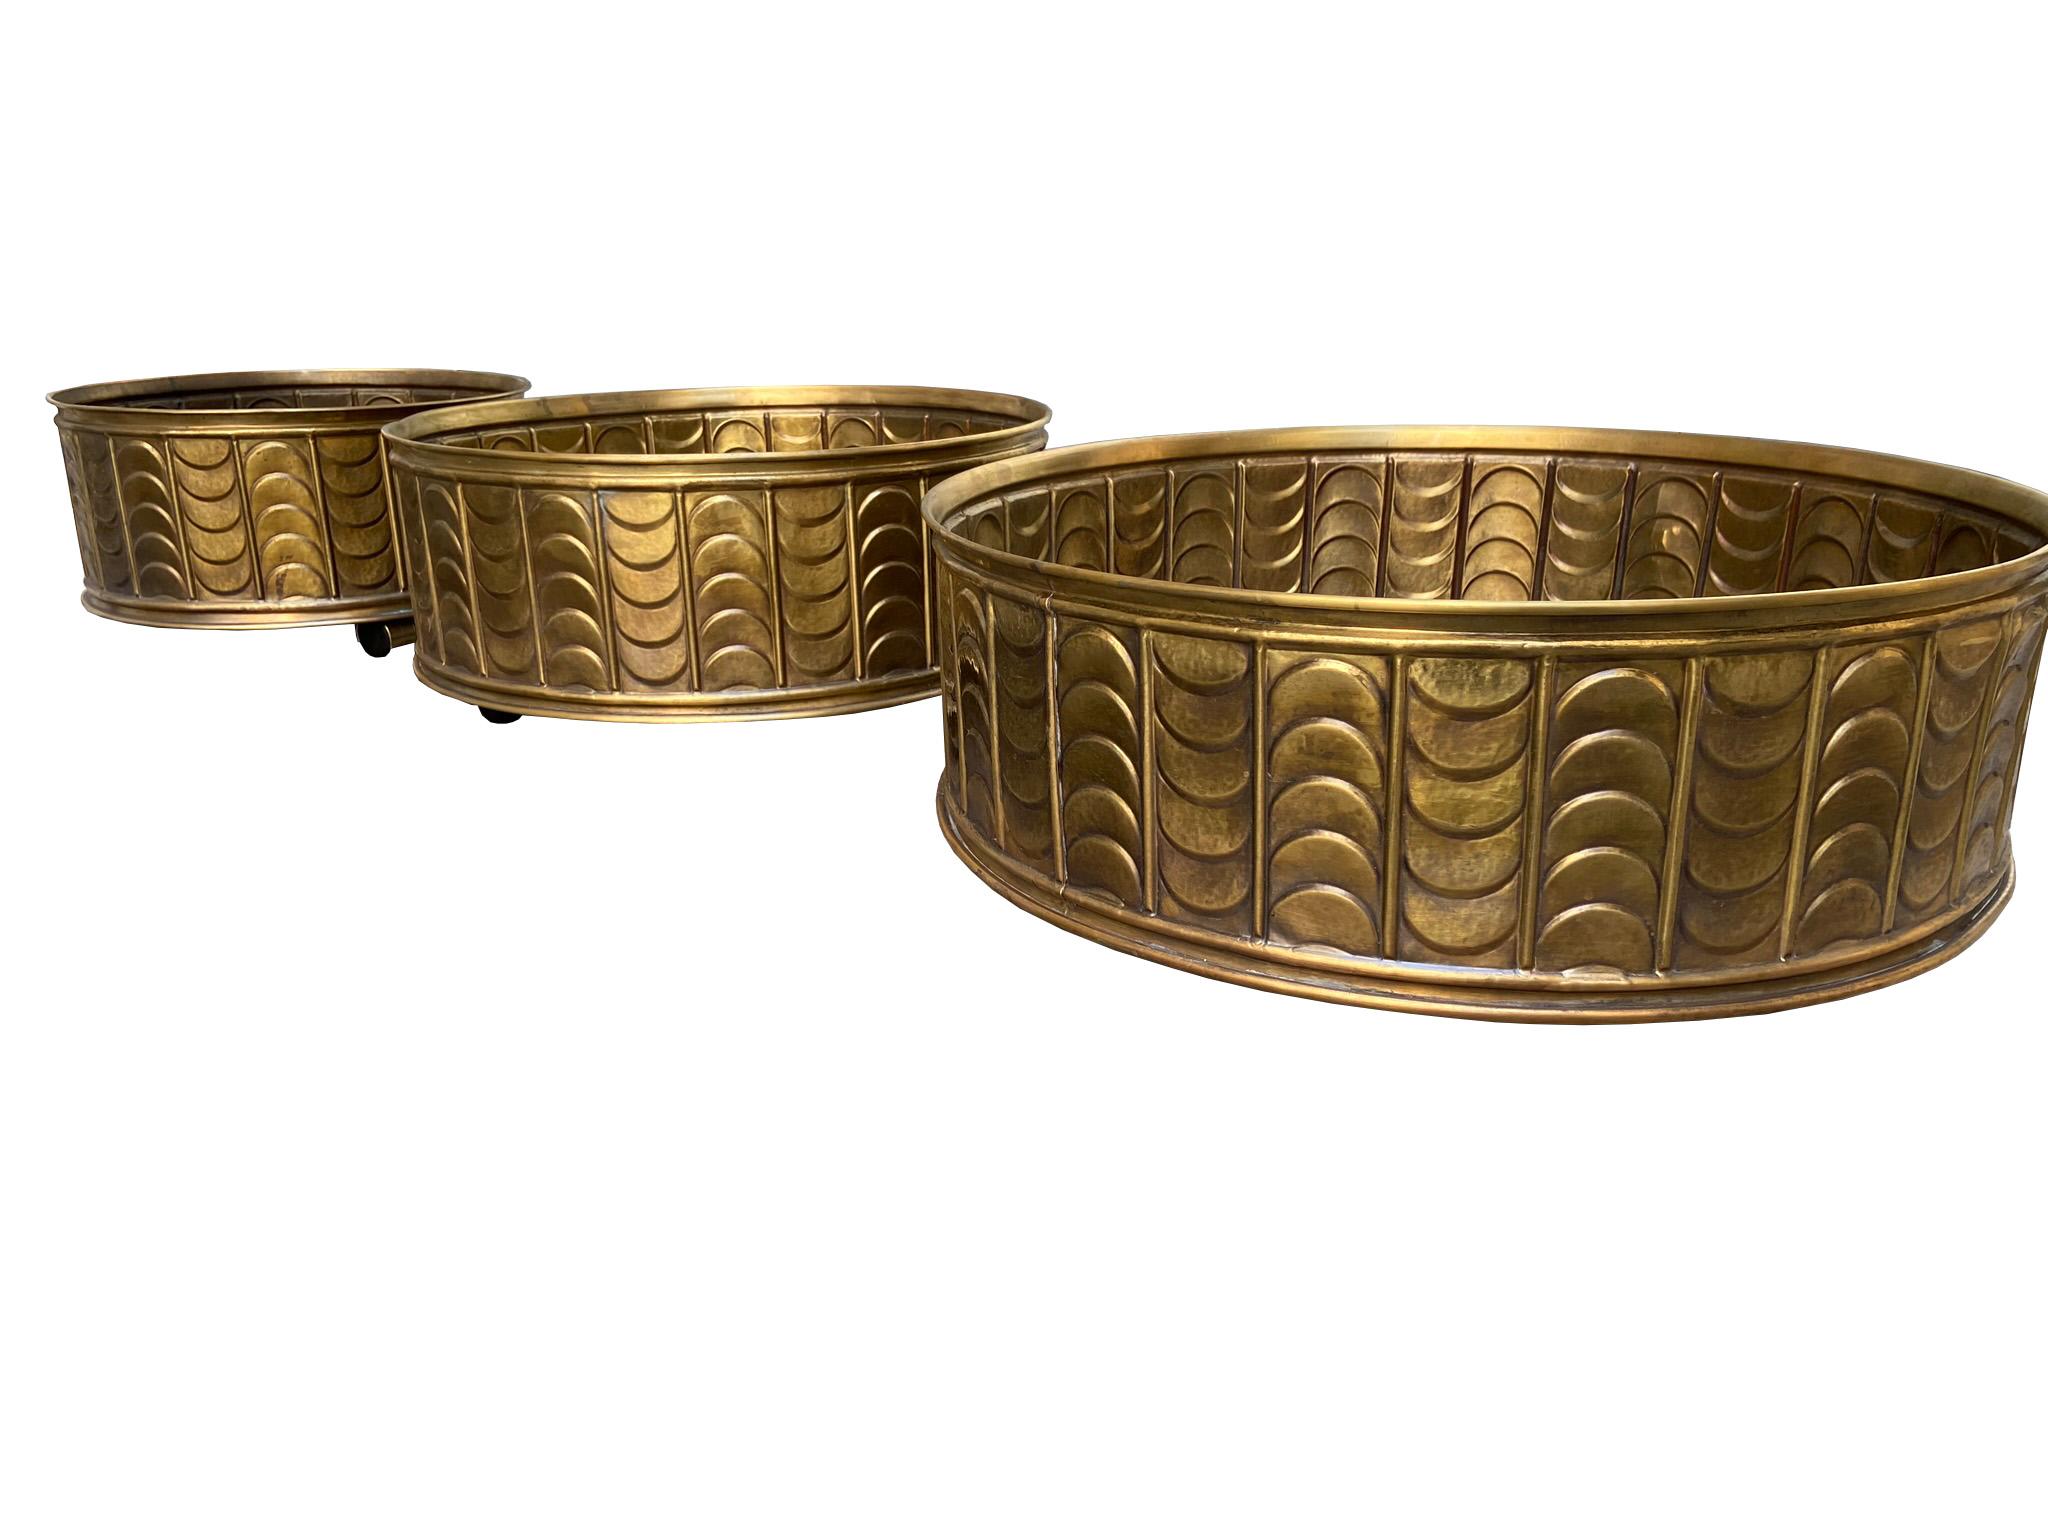 Group of 3 magnificent cachepot in embossed brass with wheels, of various sizes, storable one in the other.